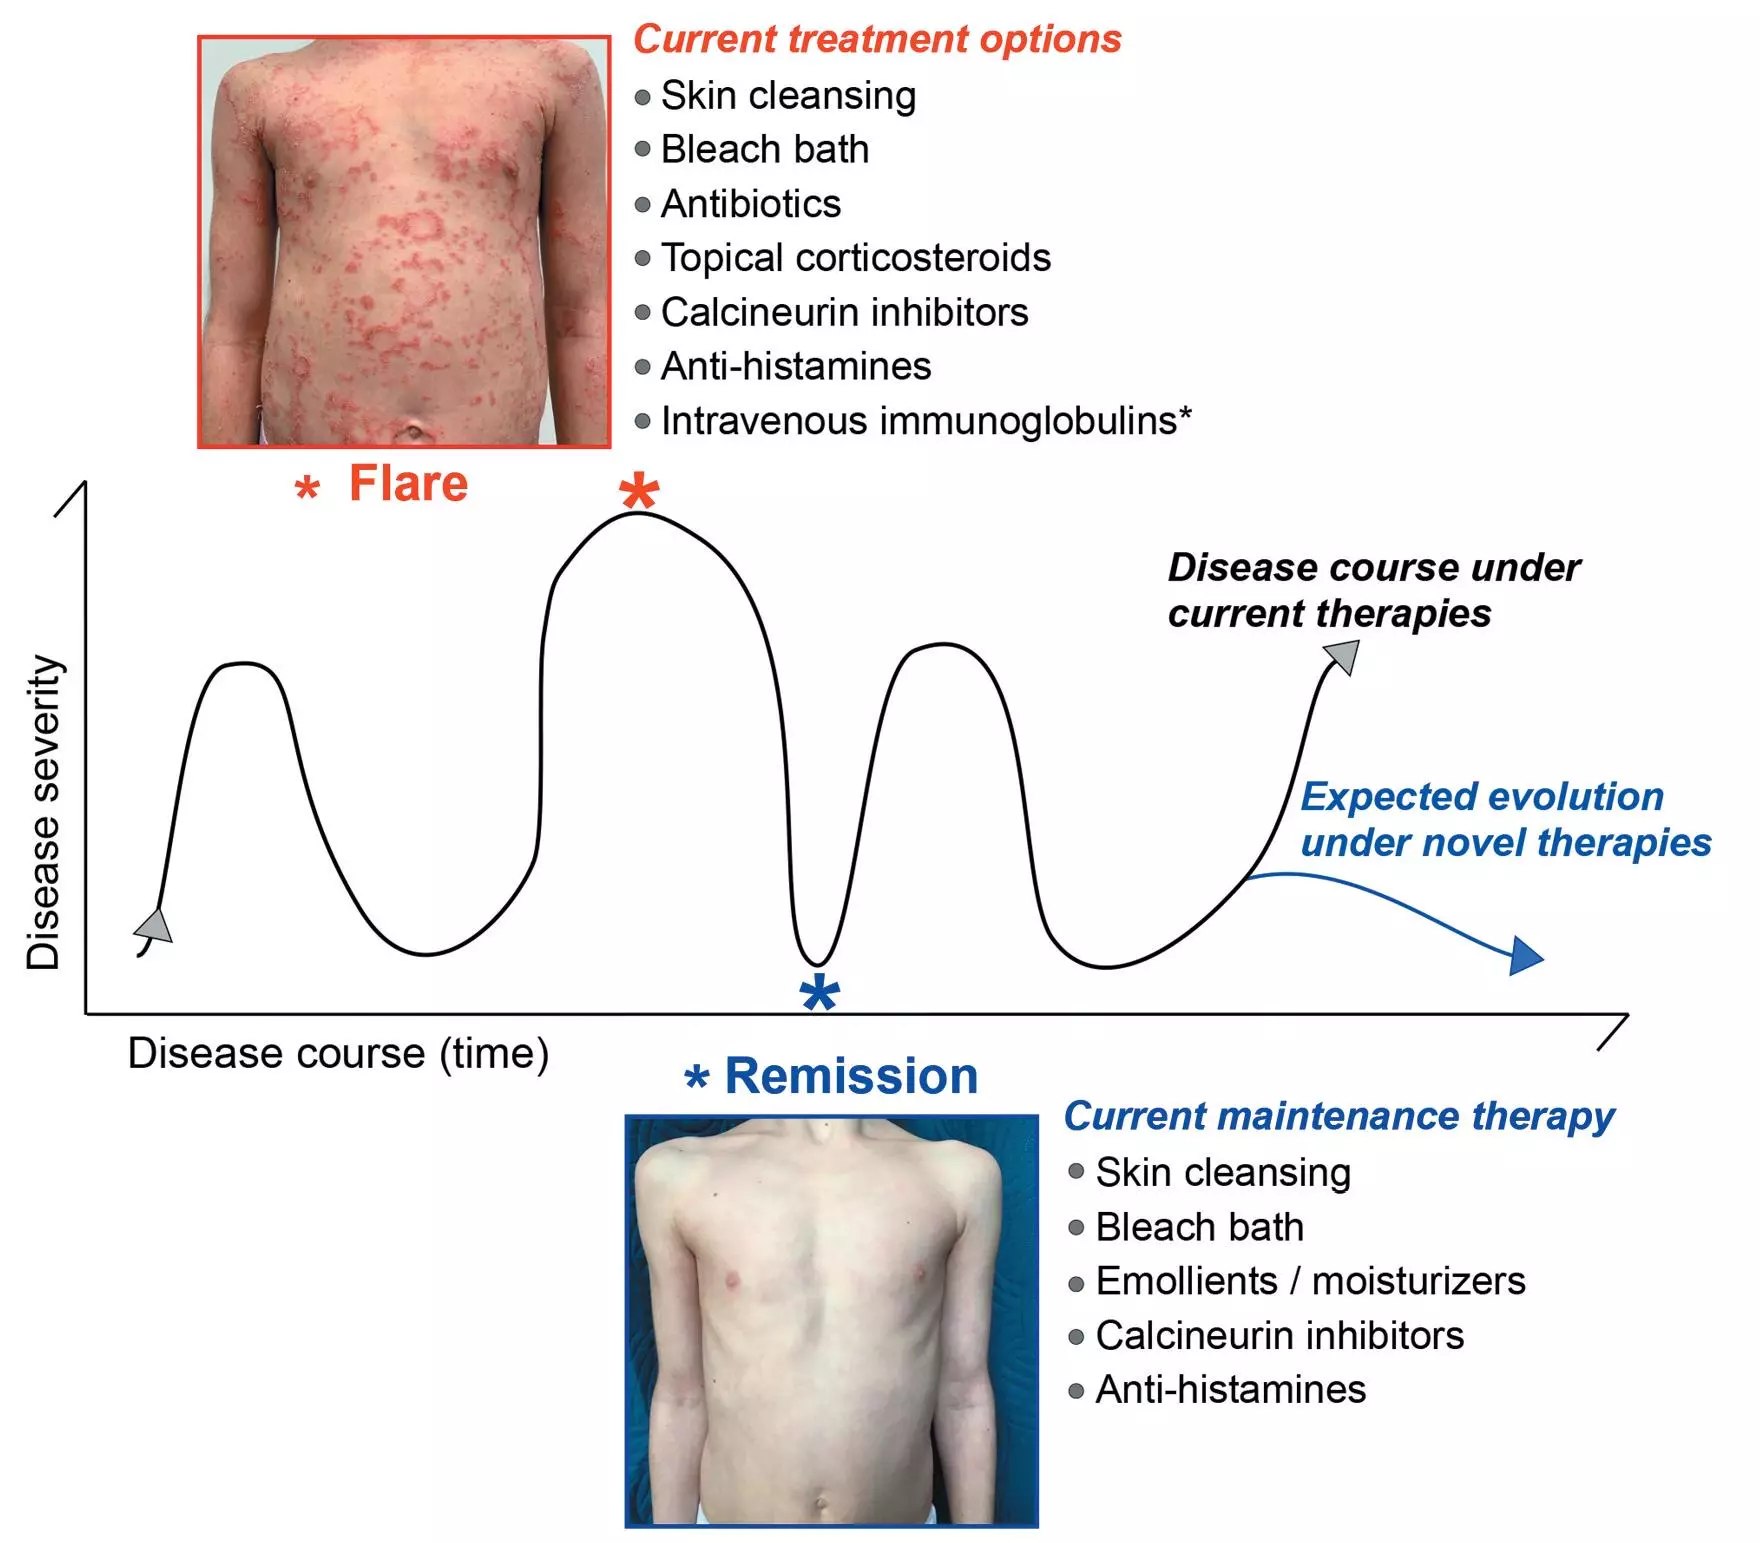 Common therapeutic approaches to breaking the vicious cycle of epidermal barrier defects and inflammation in Netherton syndrome